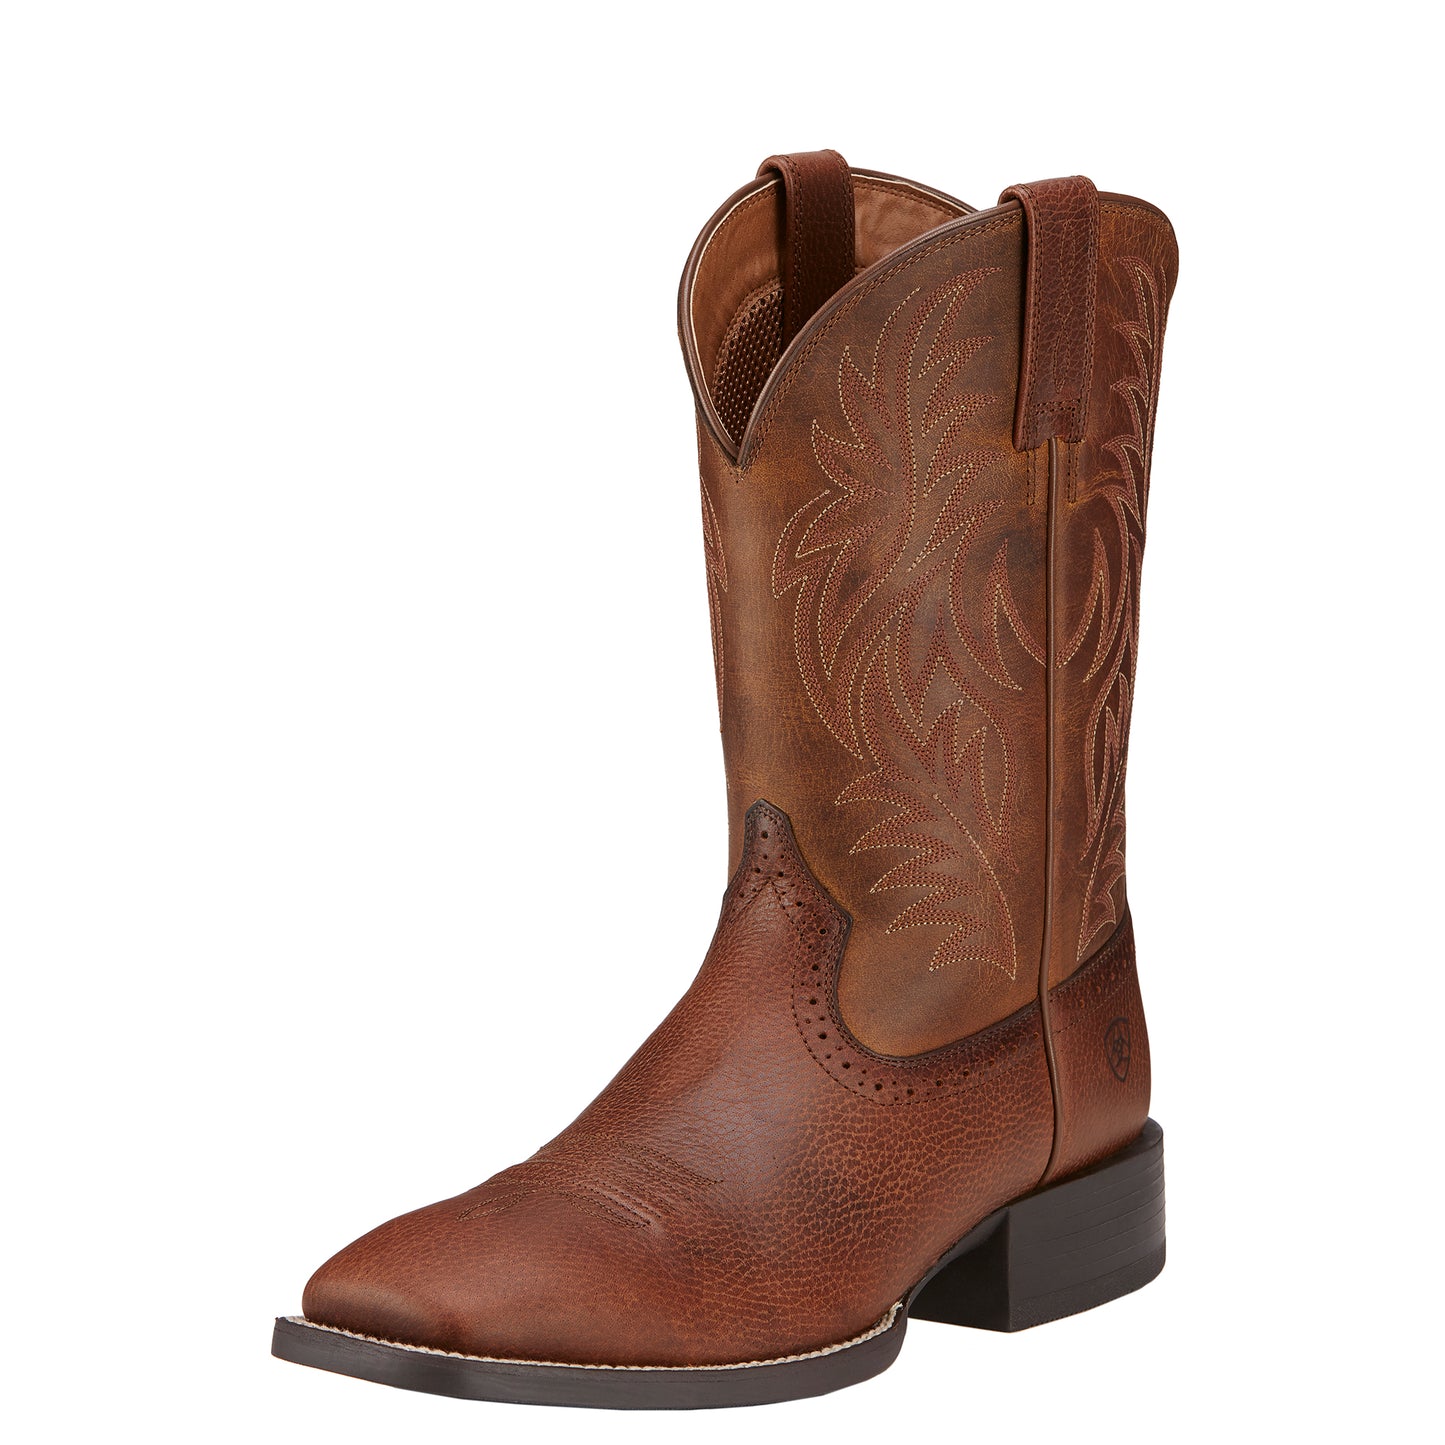 Ariat Sport Wide Square Toe Western Boot 10016291